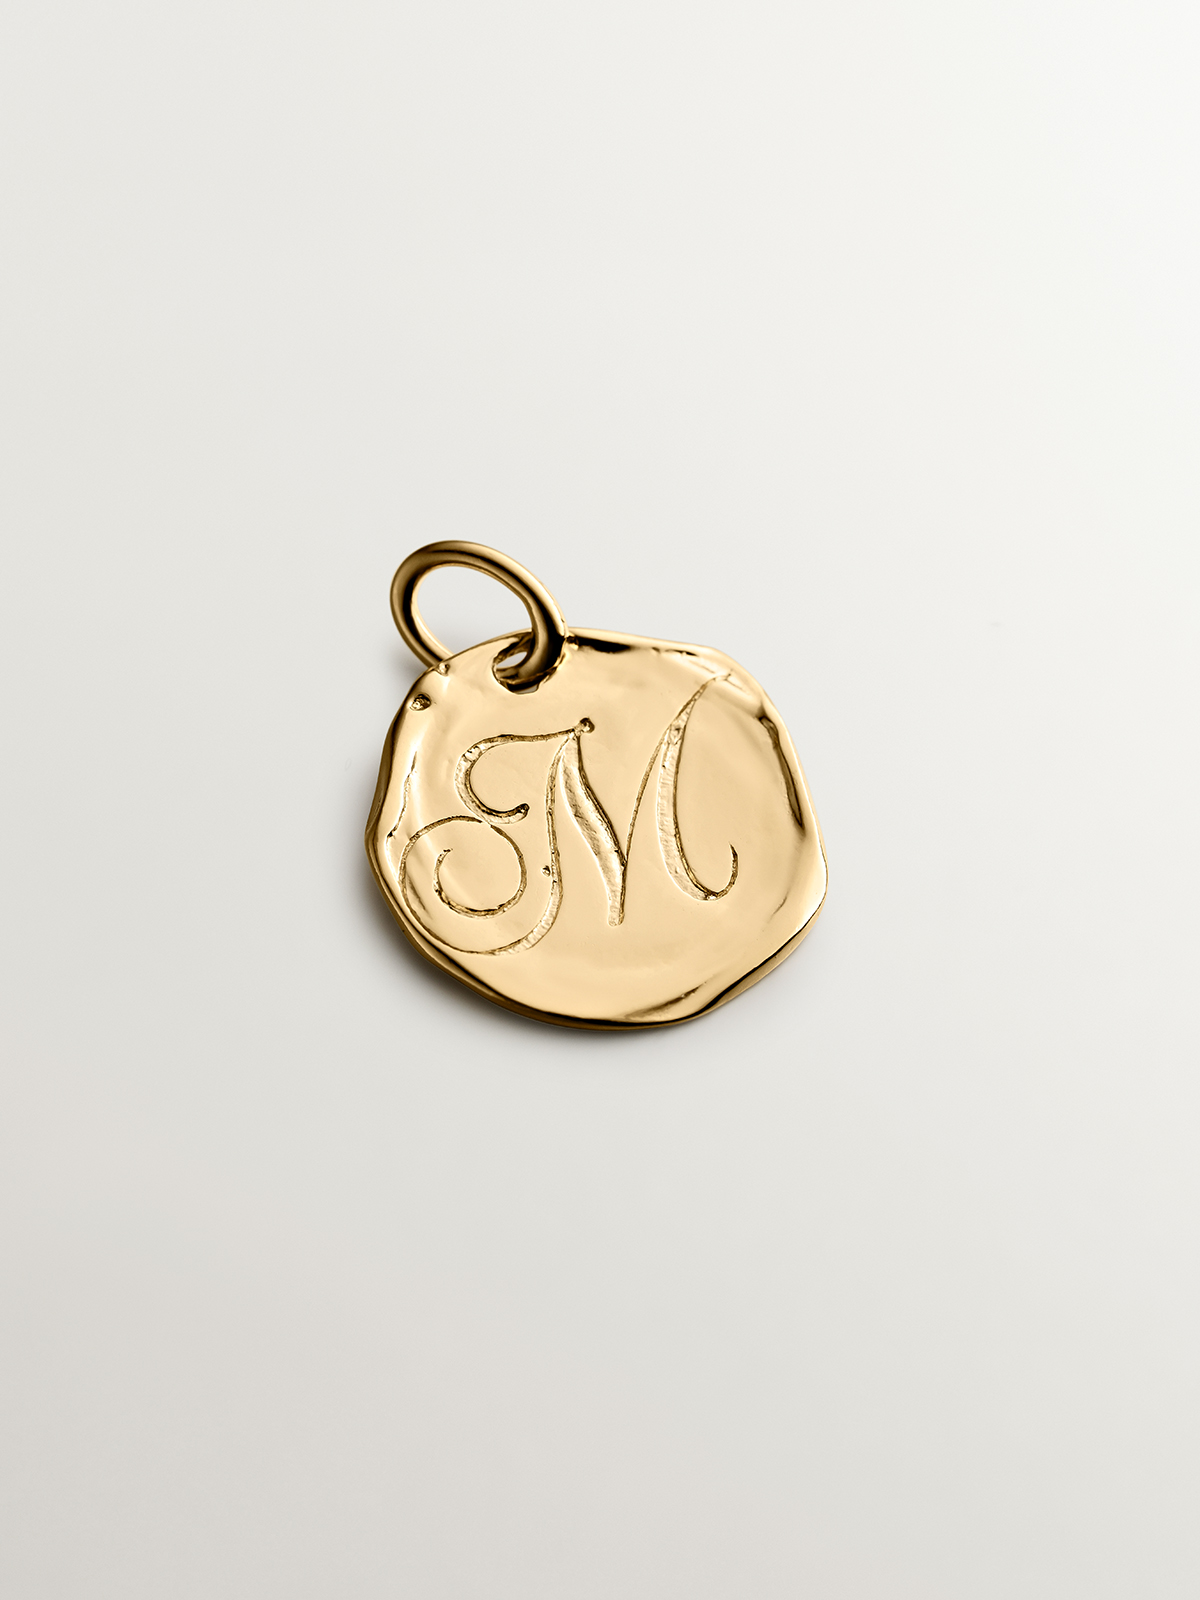 Handcrafted charm made of 925 silver bathed in 18K yellow gold with initial M.